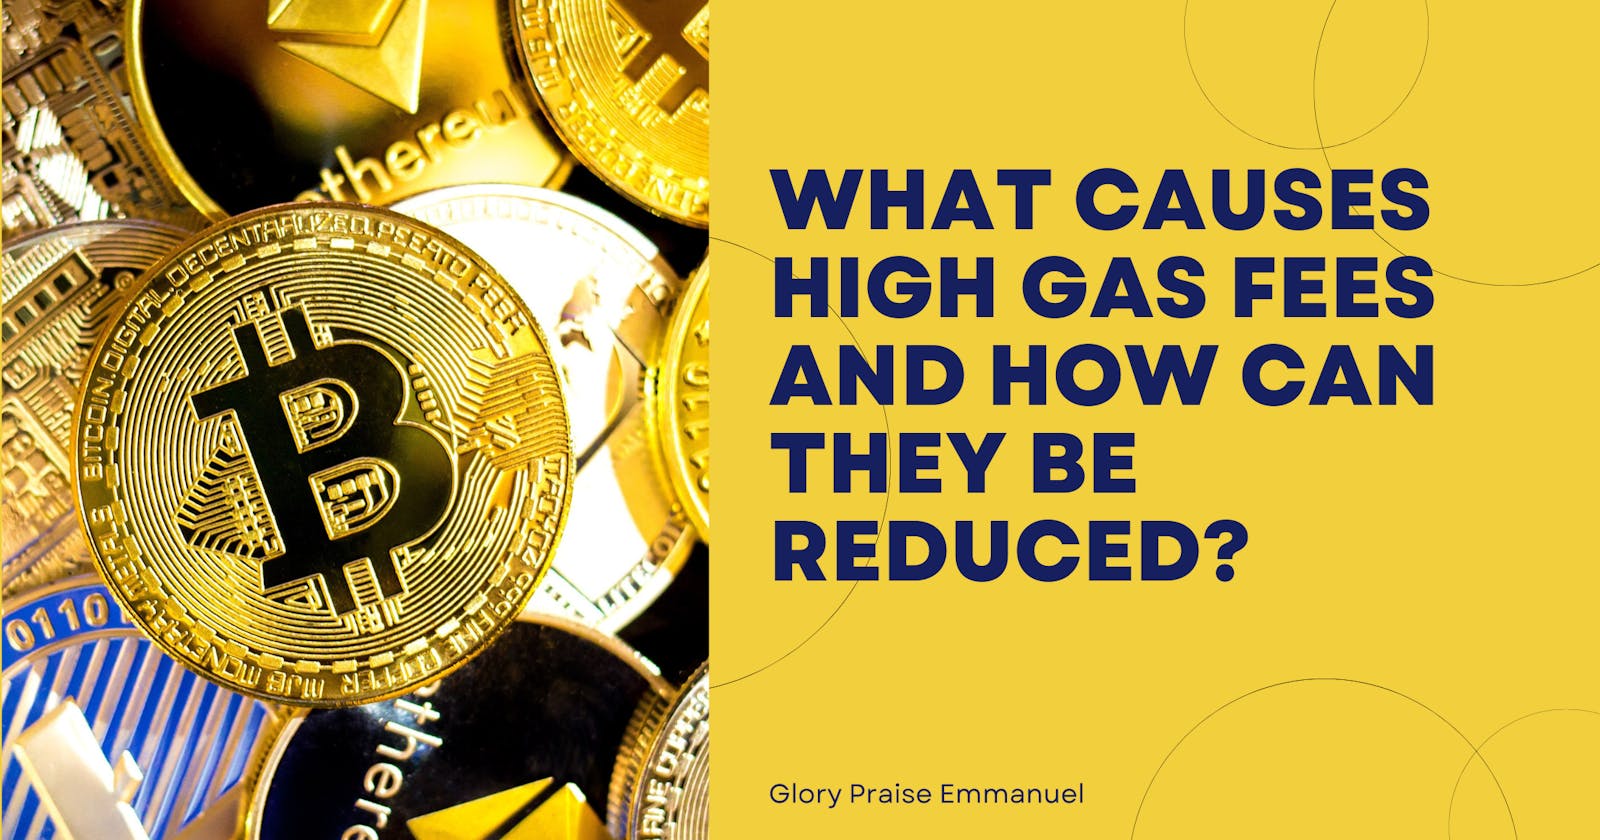 What Causes High Gas Fees and How Can They Be Reduced?